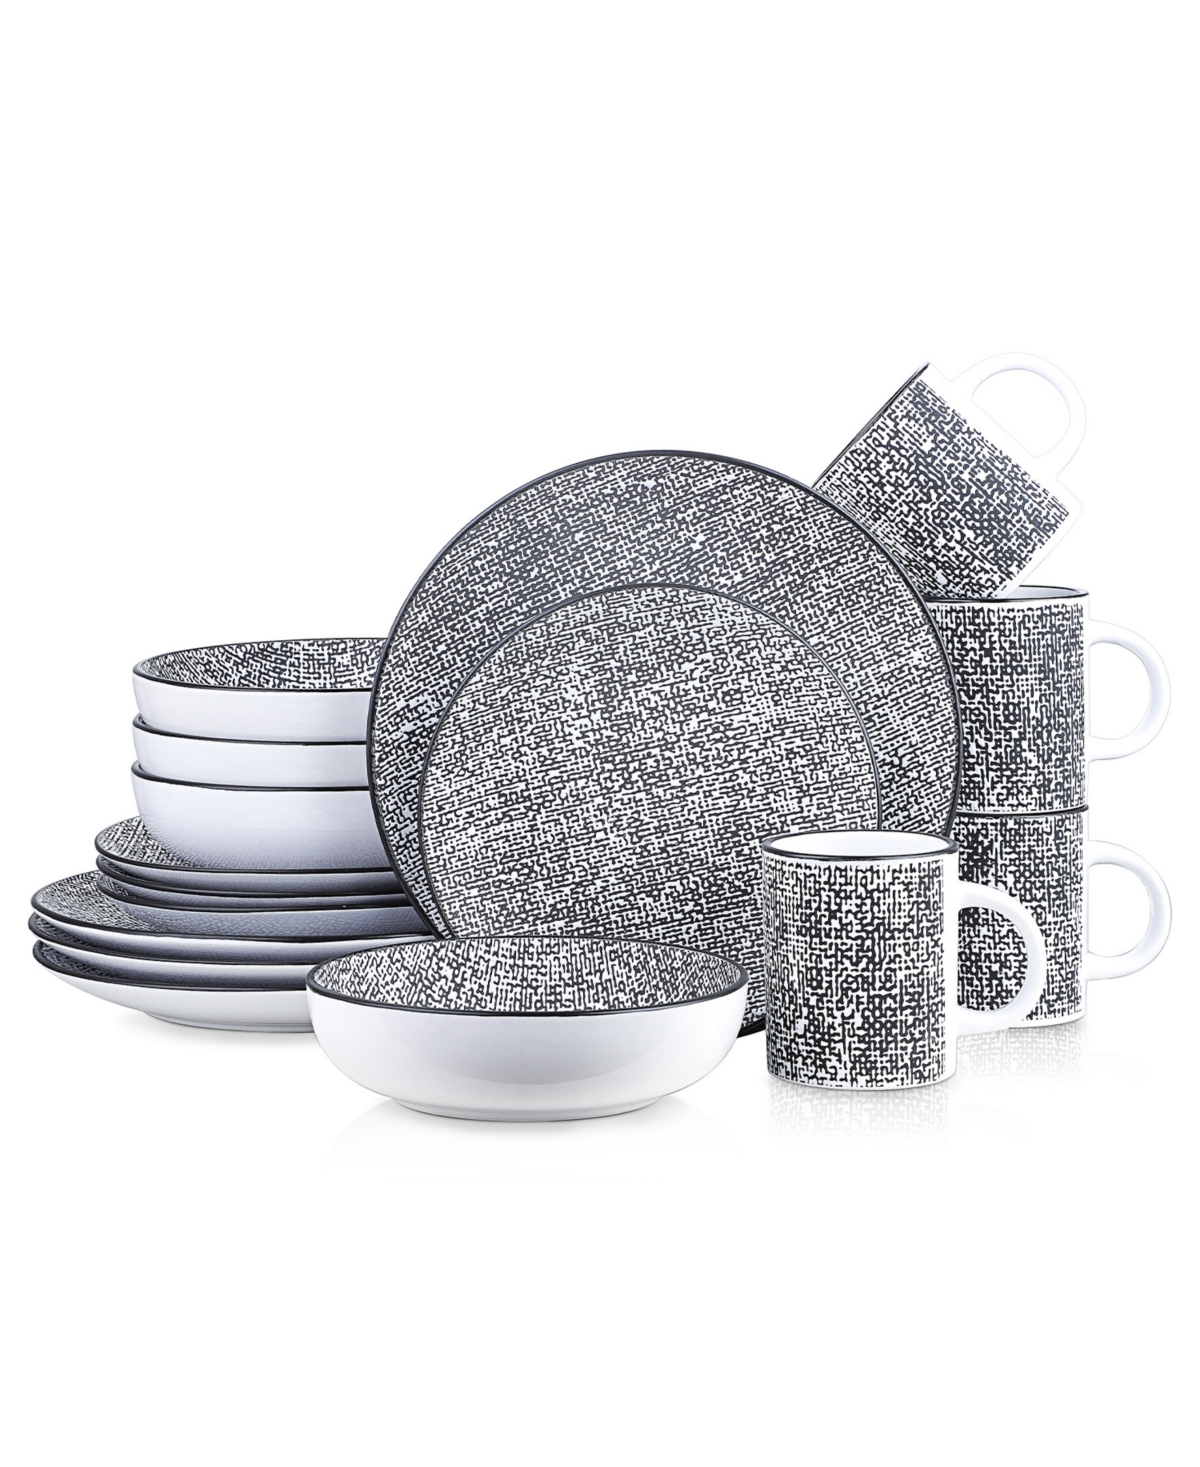 Sophie Stoneware 16 Pieces Dinnerware Set, Service For 4 - White and Black